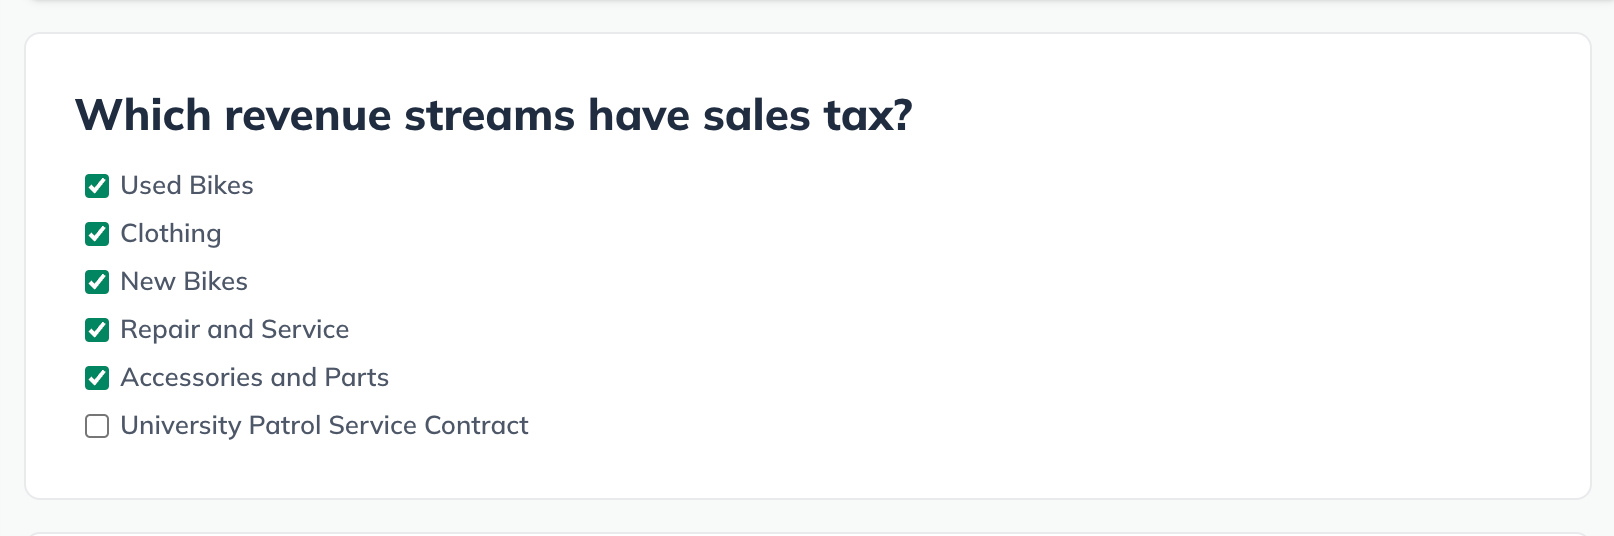 sales_tax_select.png